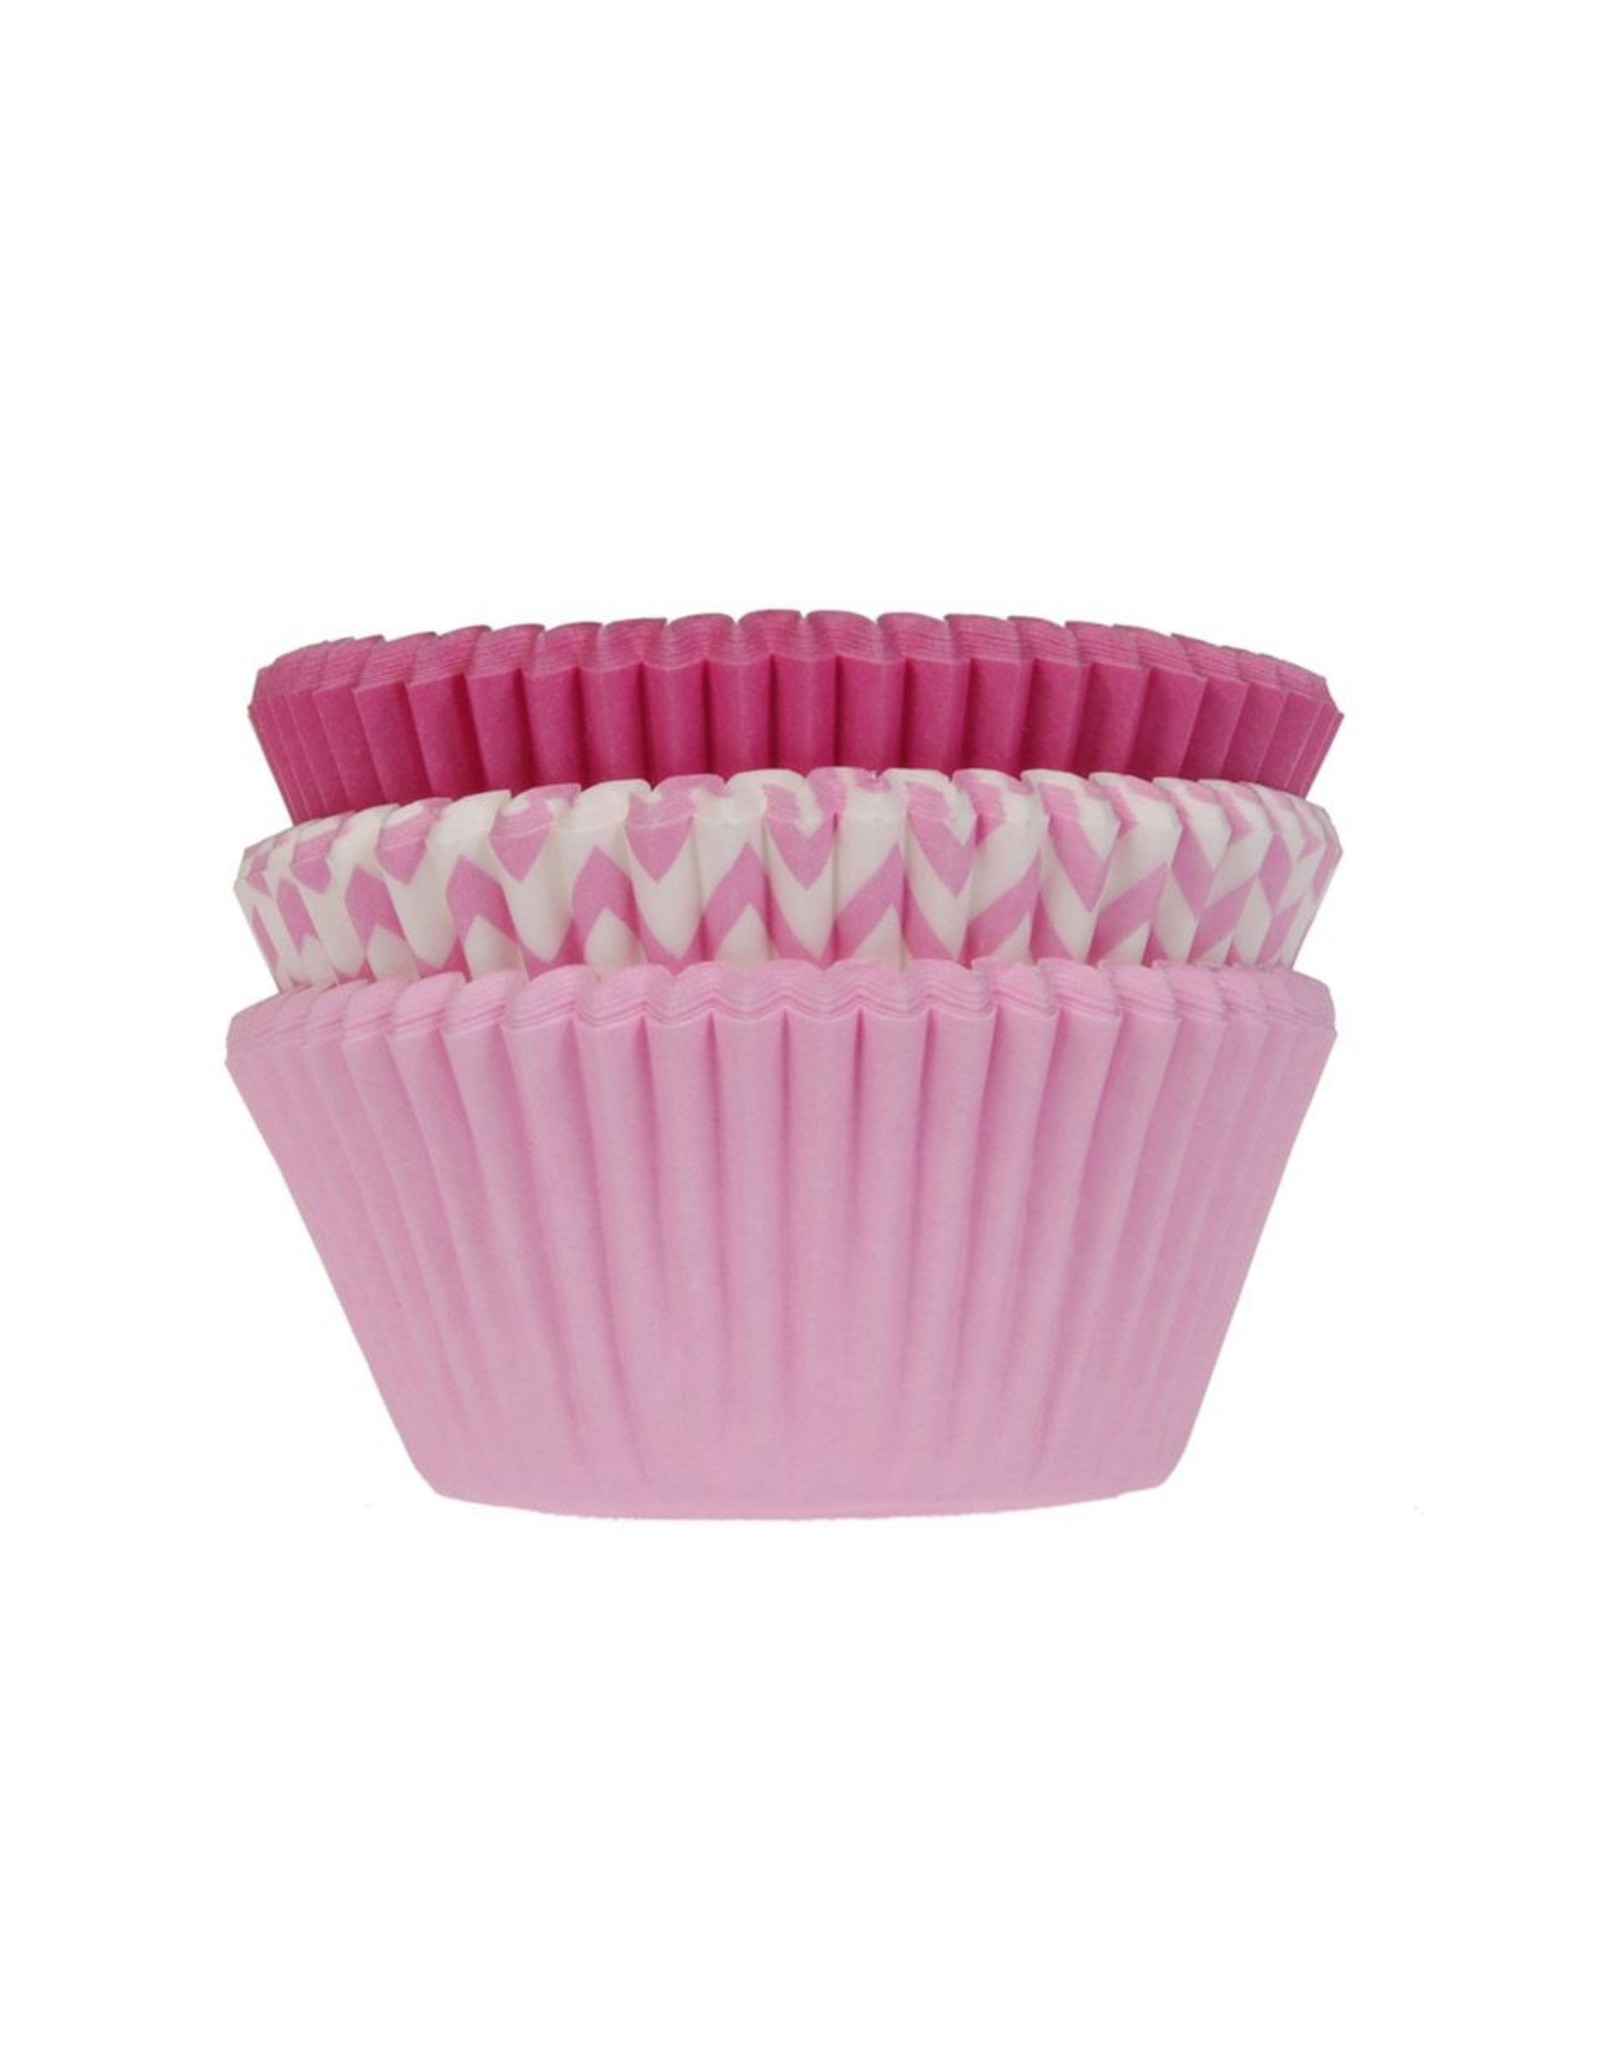 House of Marie House of Marie Baking Cups Assorti Roze pk/75